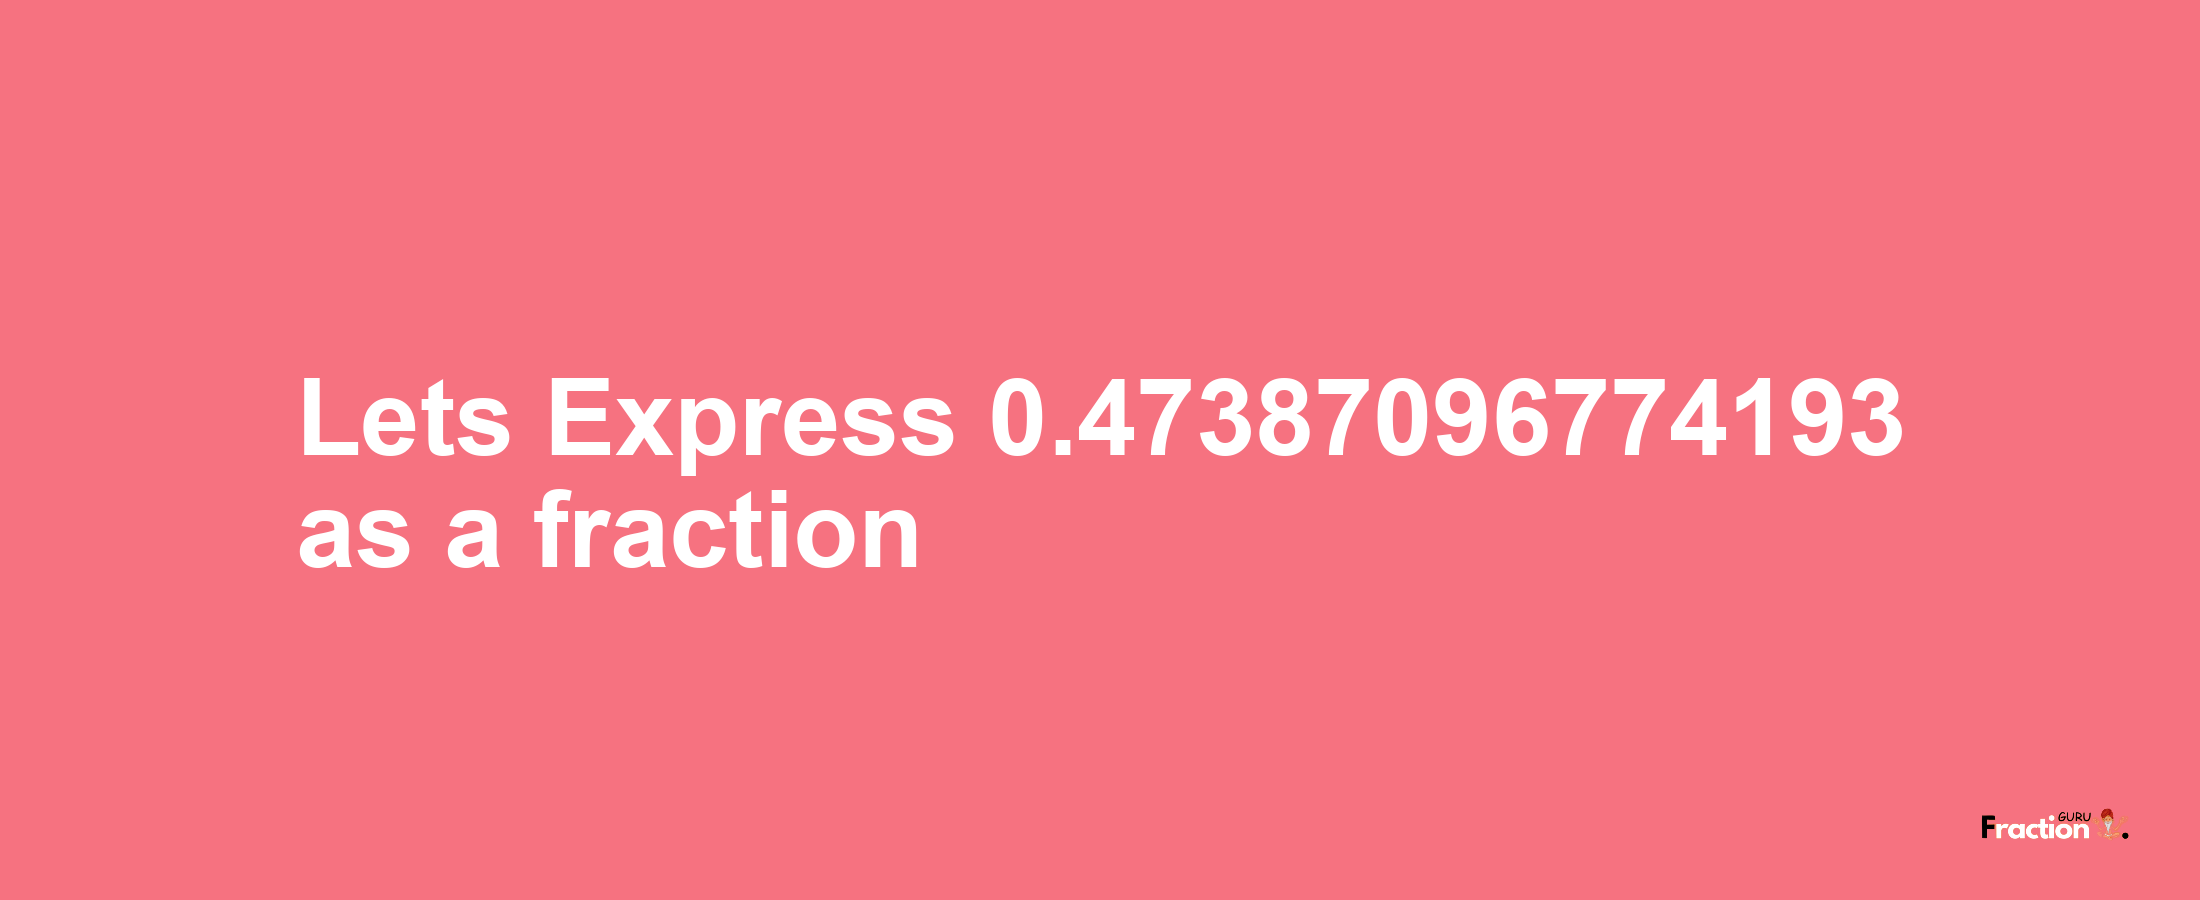 Lets Express 0.47387096774193 as afraction